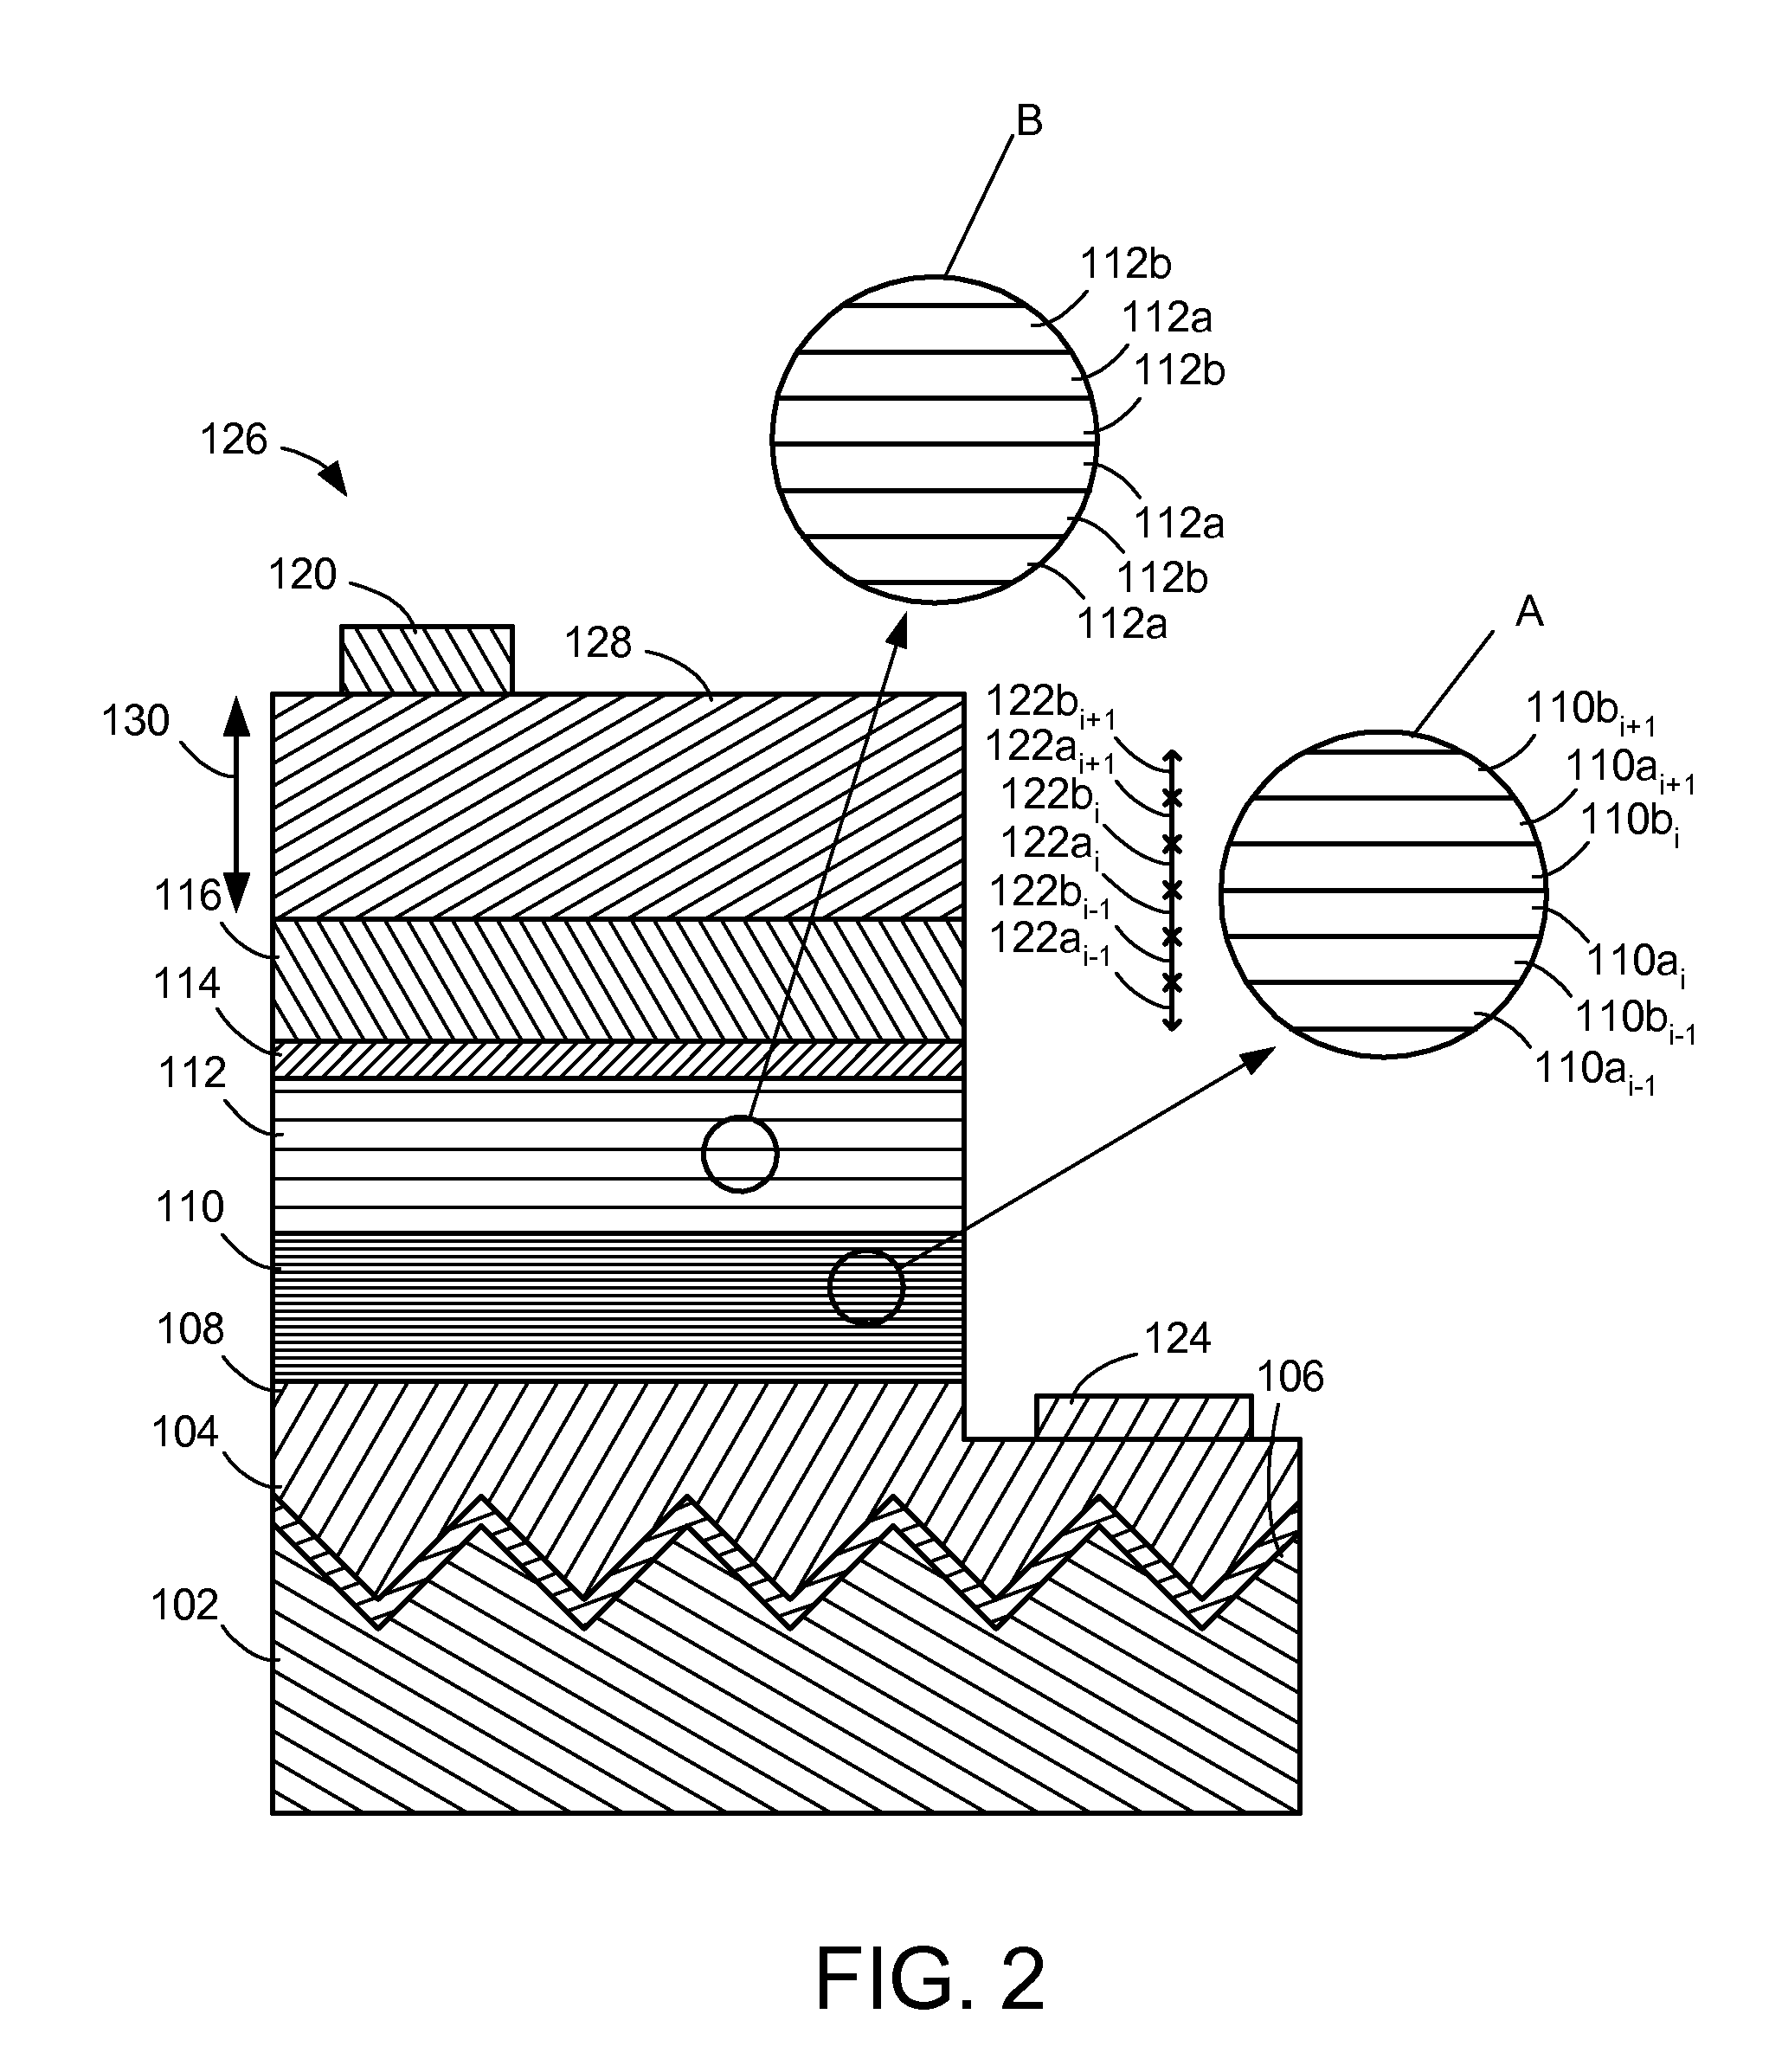 (Al,In,Ga,B)N DEVICE STRUCTURES ON A PATTERNED SUBSTRATE